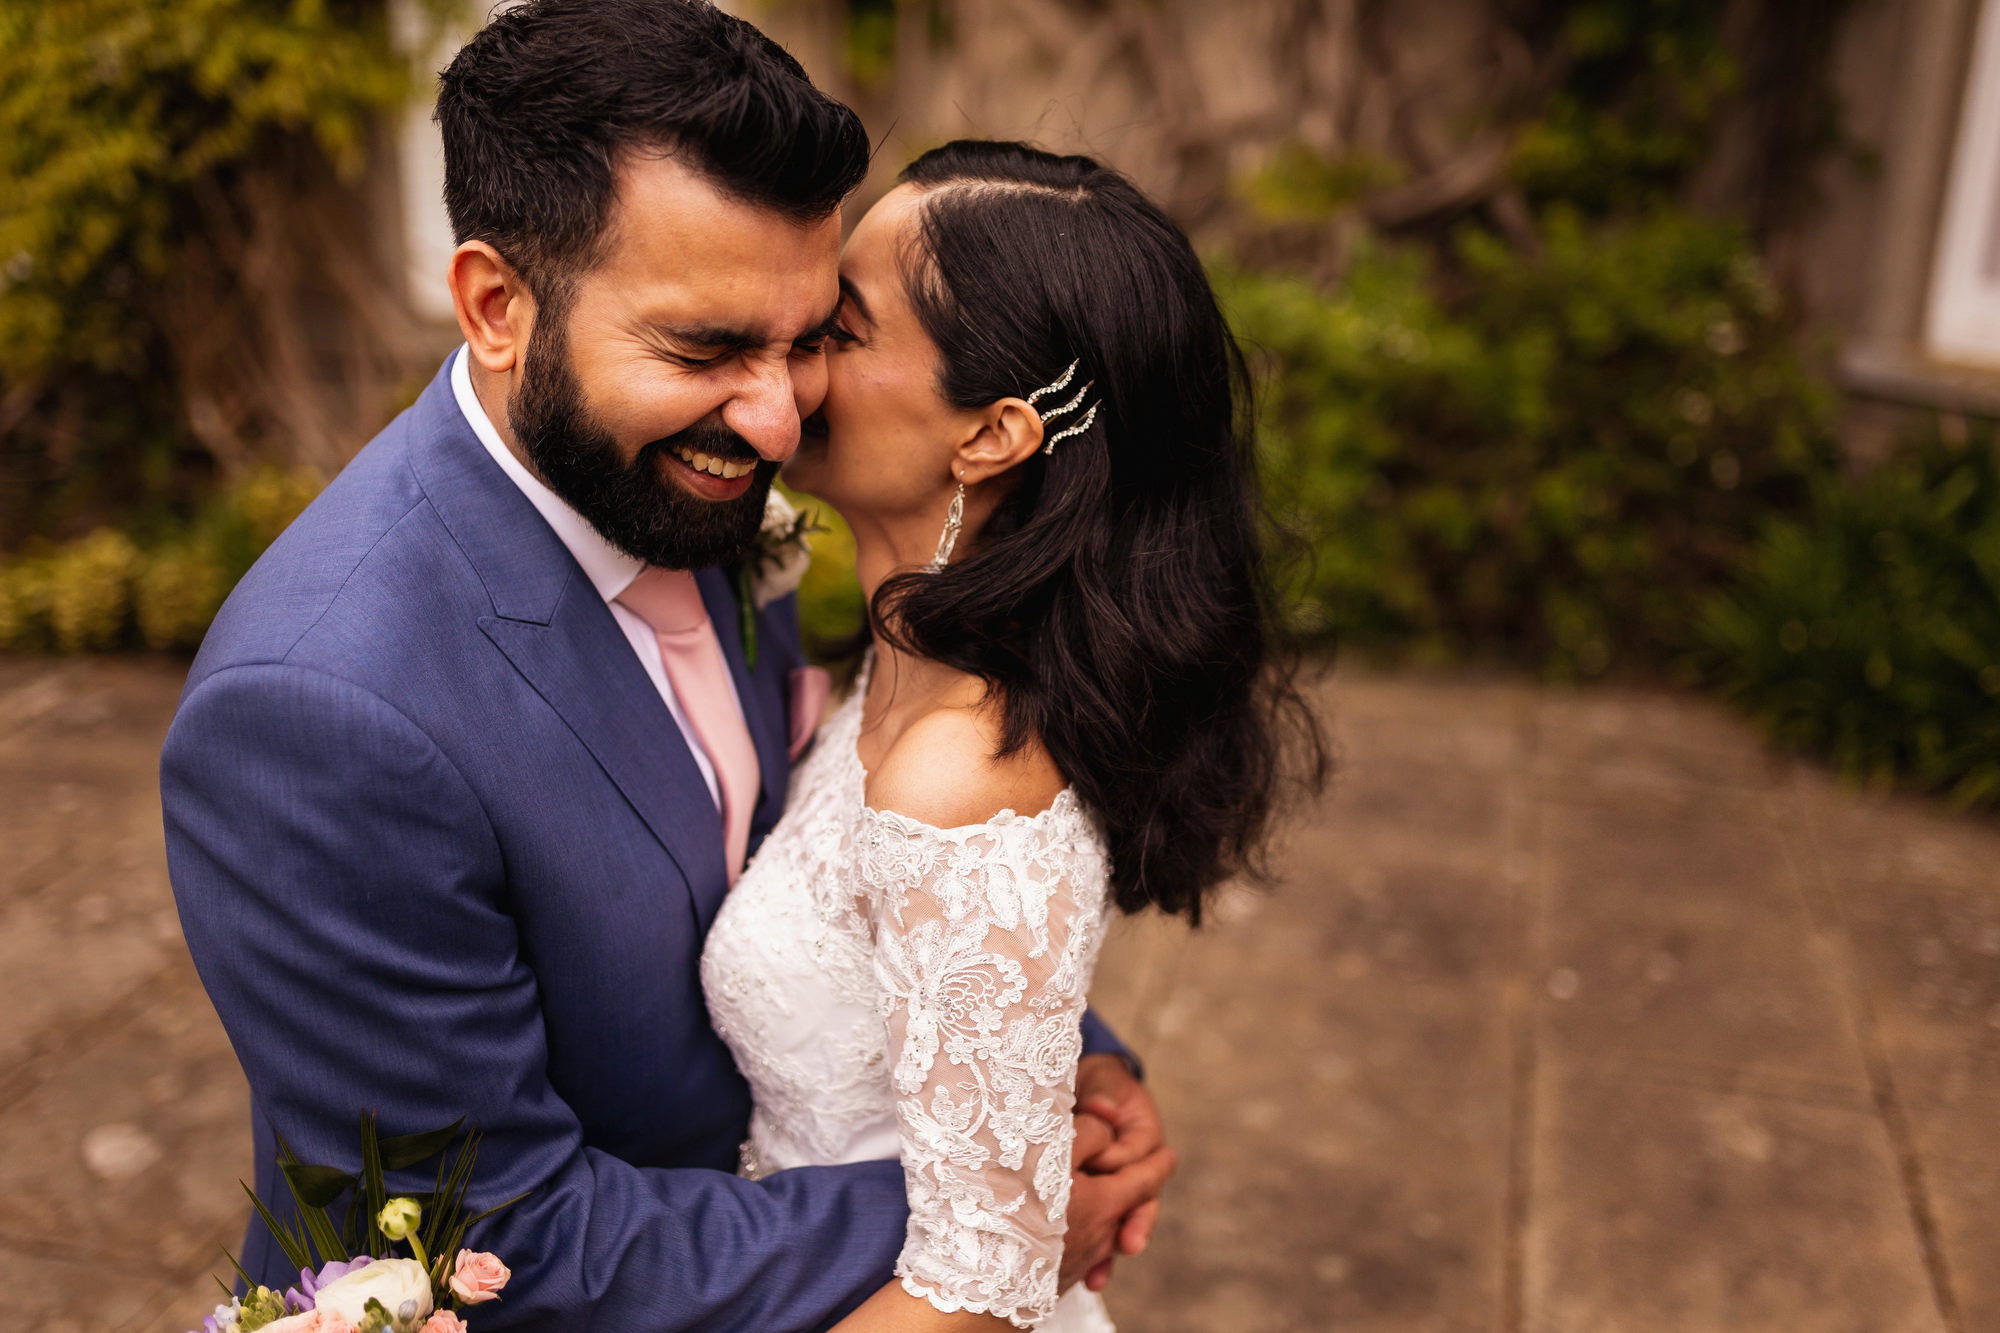 Northbrook Park in Surrey, Asian Wedding Photographer, Couples portraits